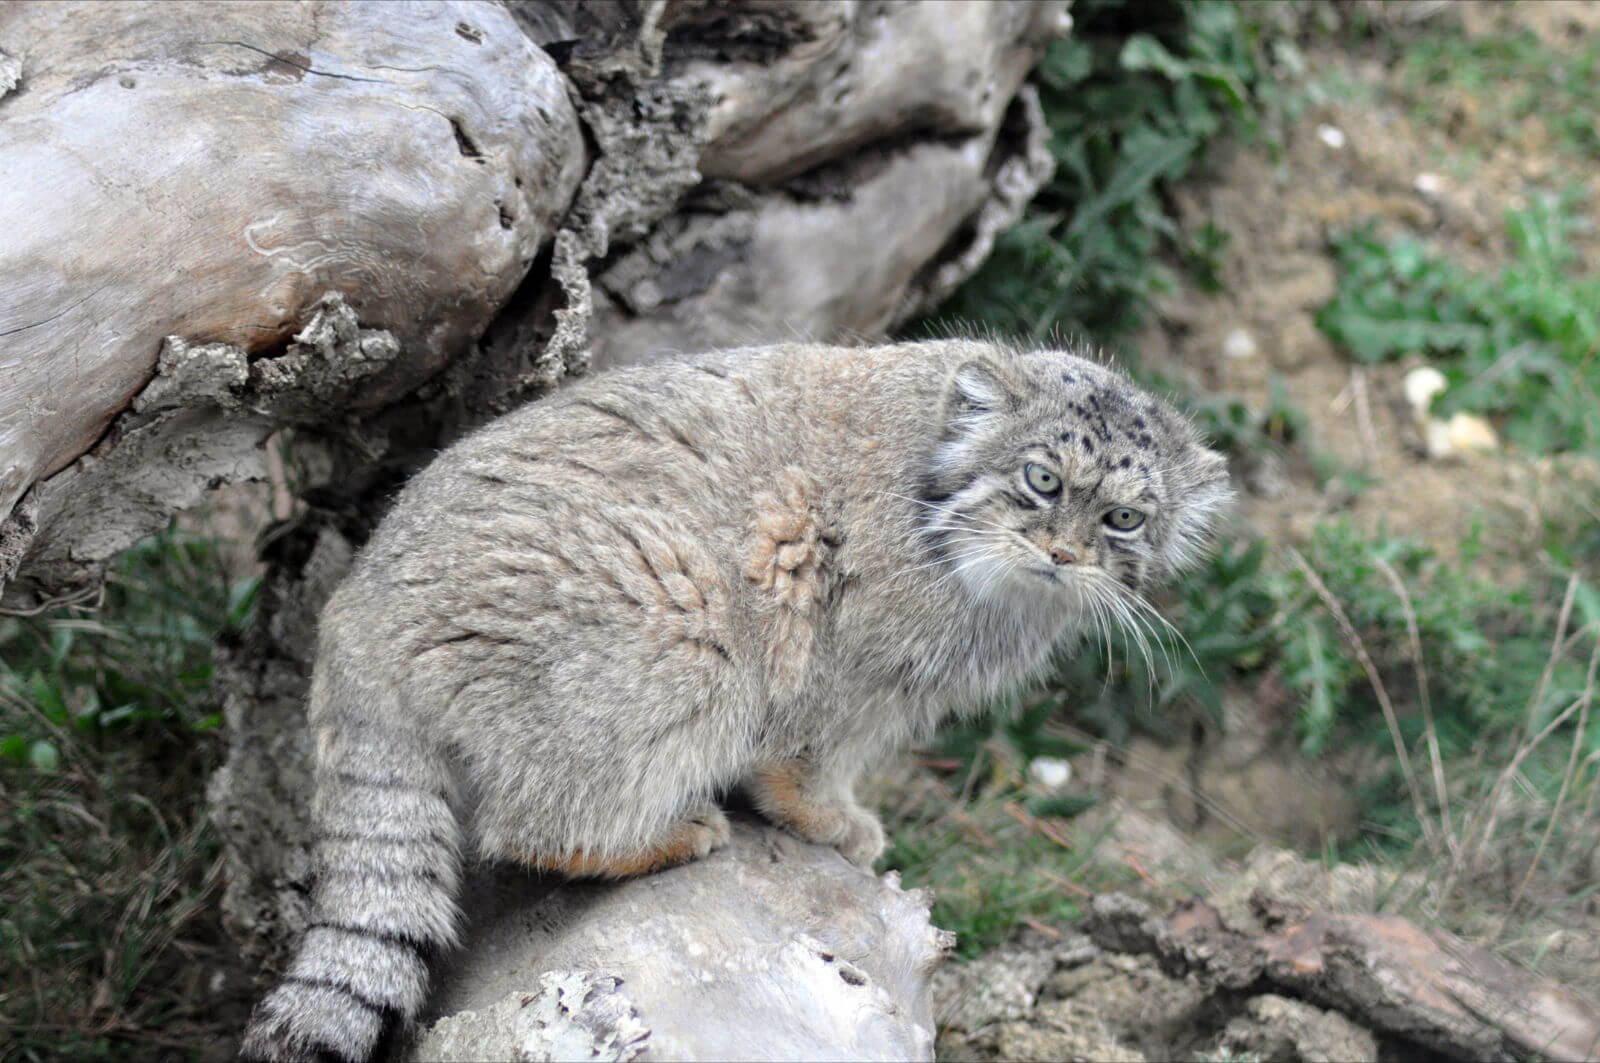 Chinese Mountain Cats